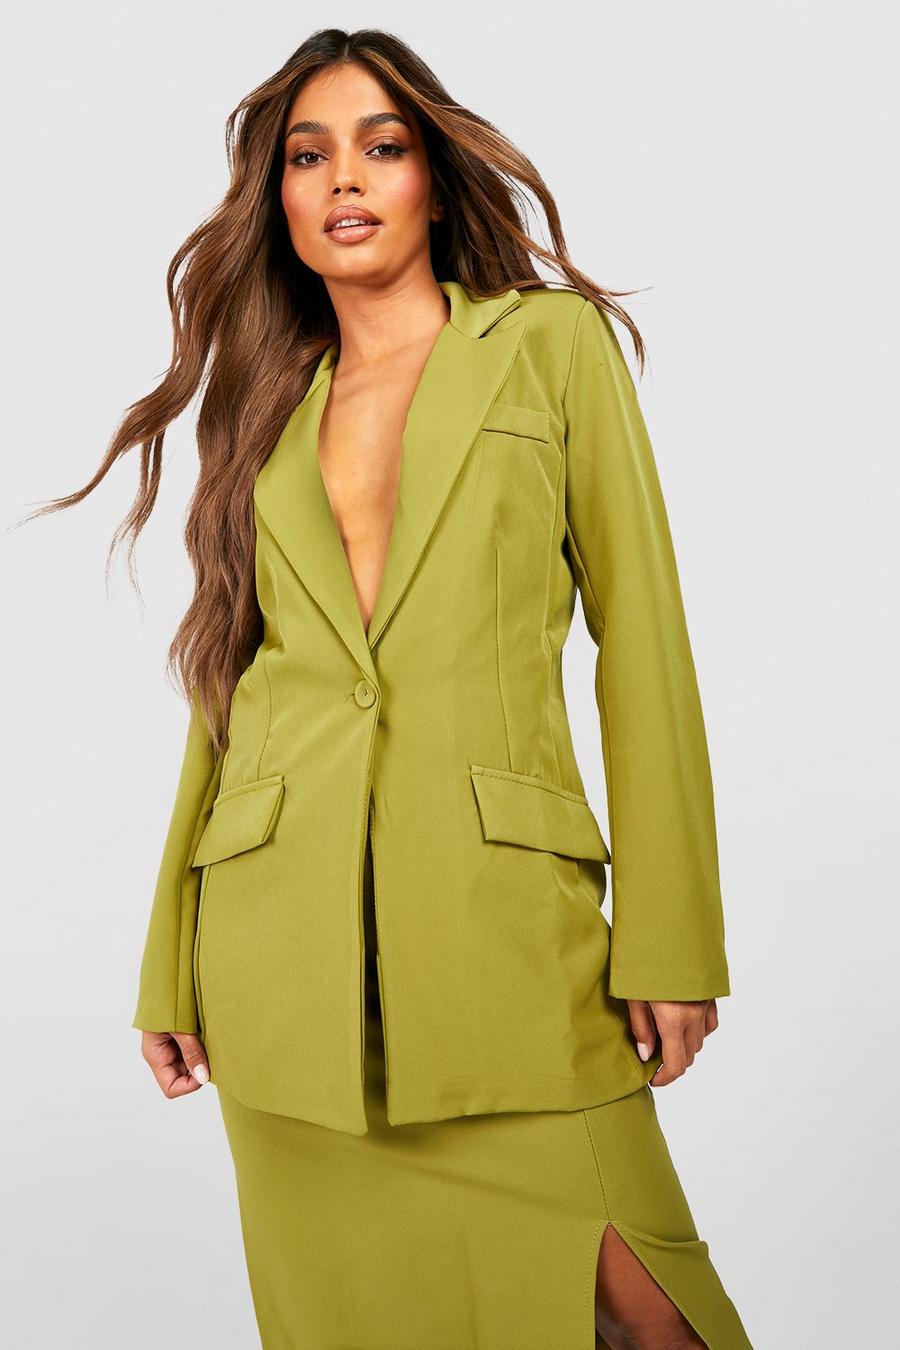 Olive green Tailored Plunge Front Fitted Blazer